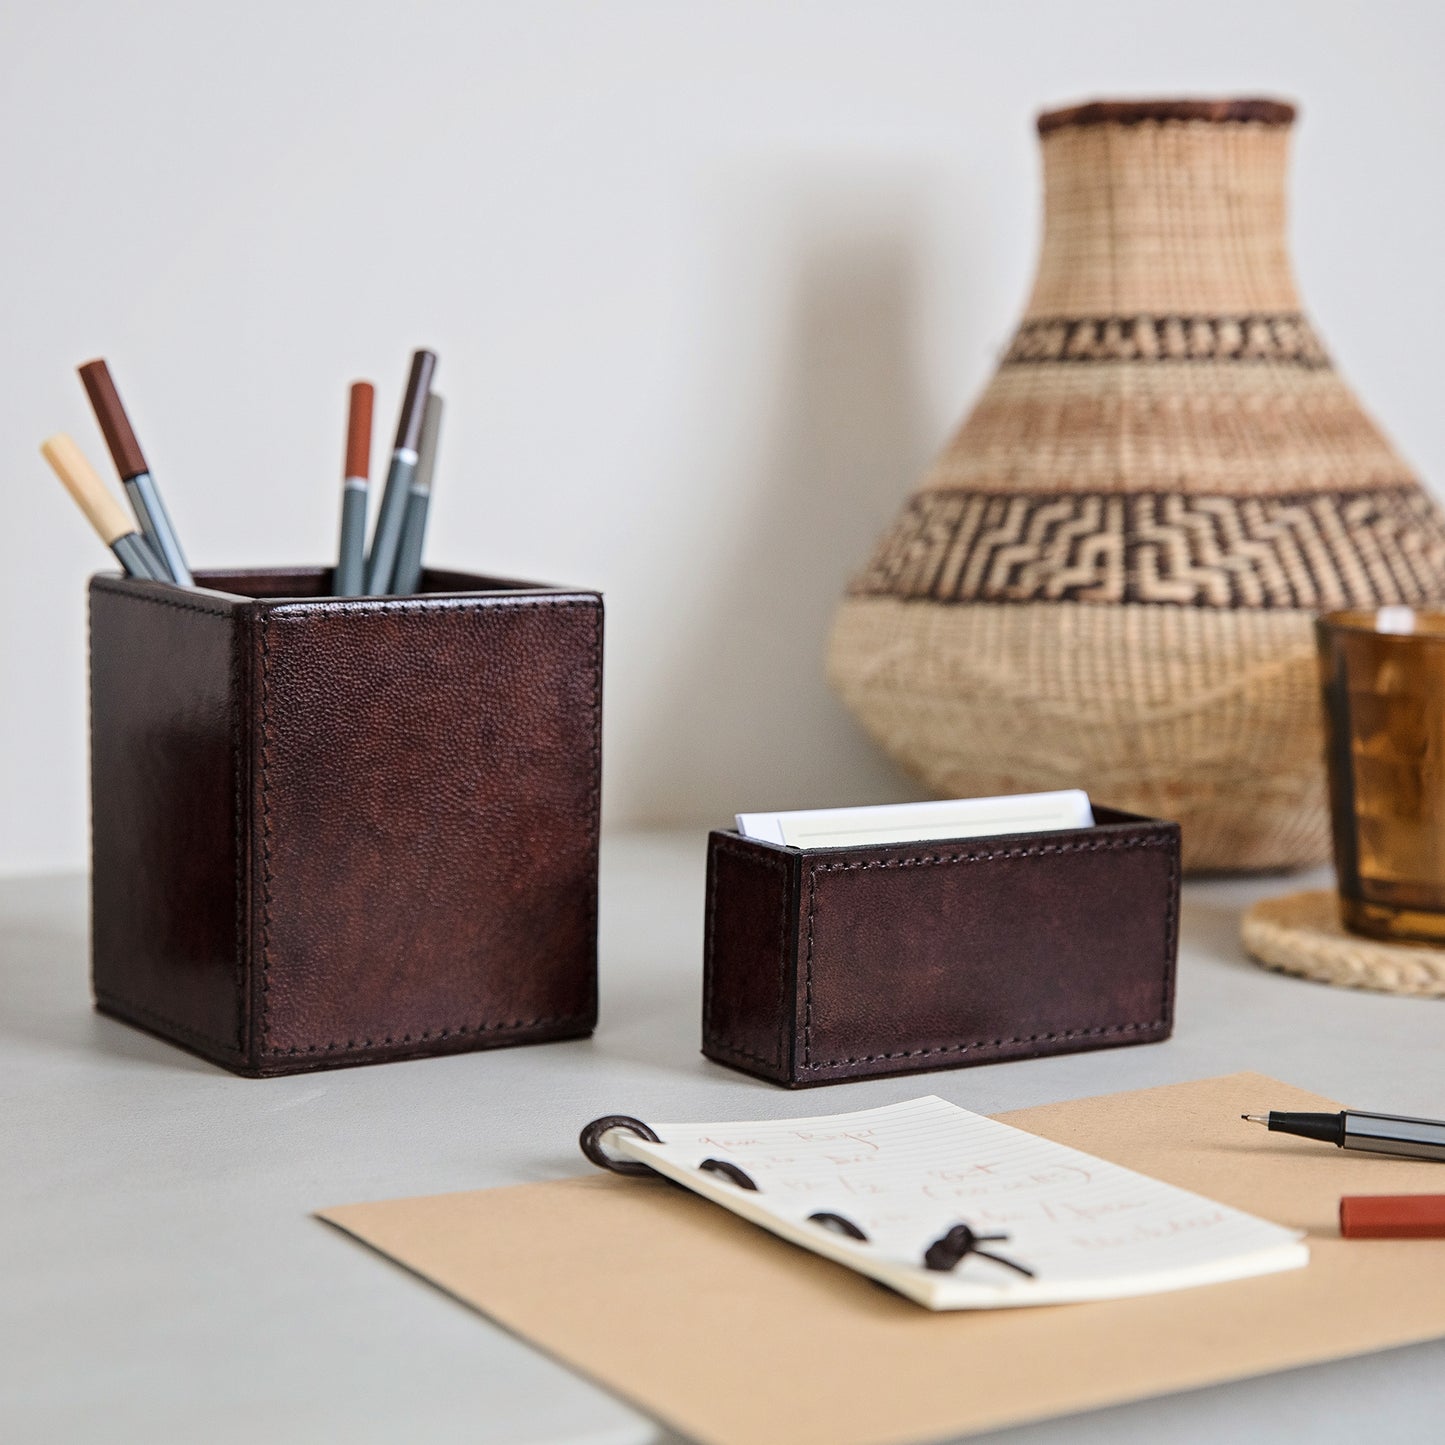 Leather pen pot and business card holder desk accessory set in brown leather. Personalise both to create a thoughtful and unique gift to celebrate a 3rd wedding anniversary or a new job.